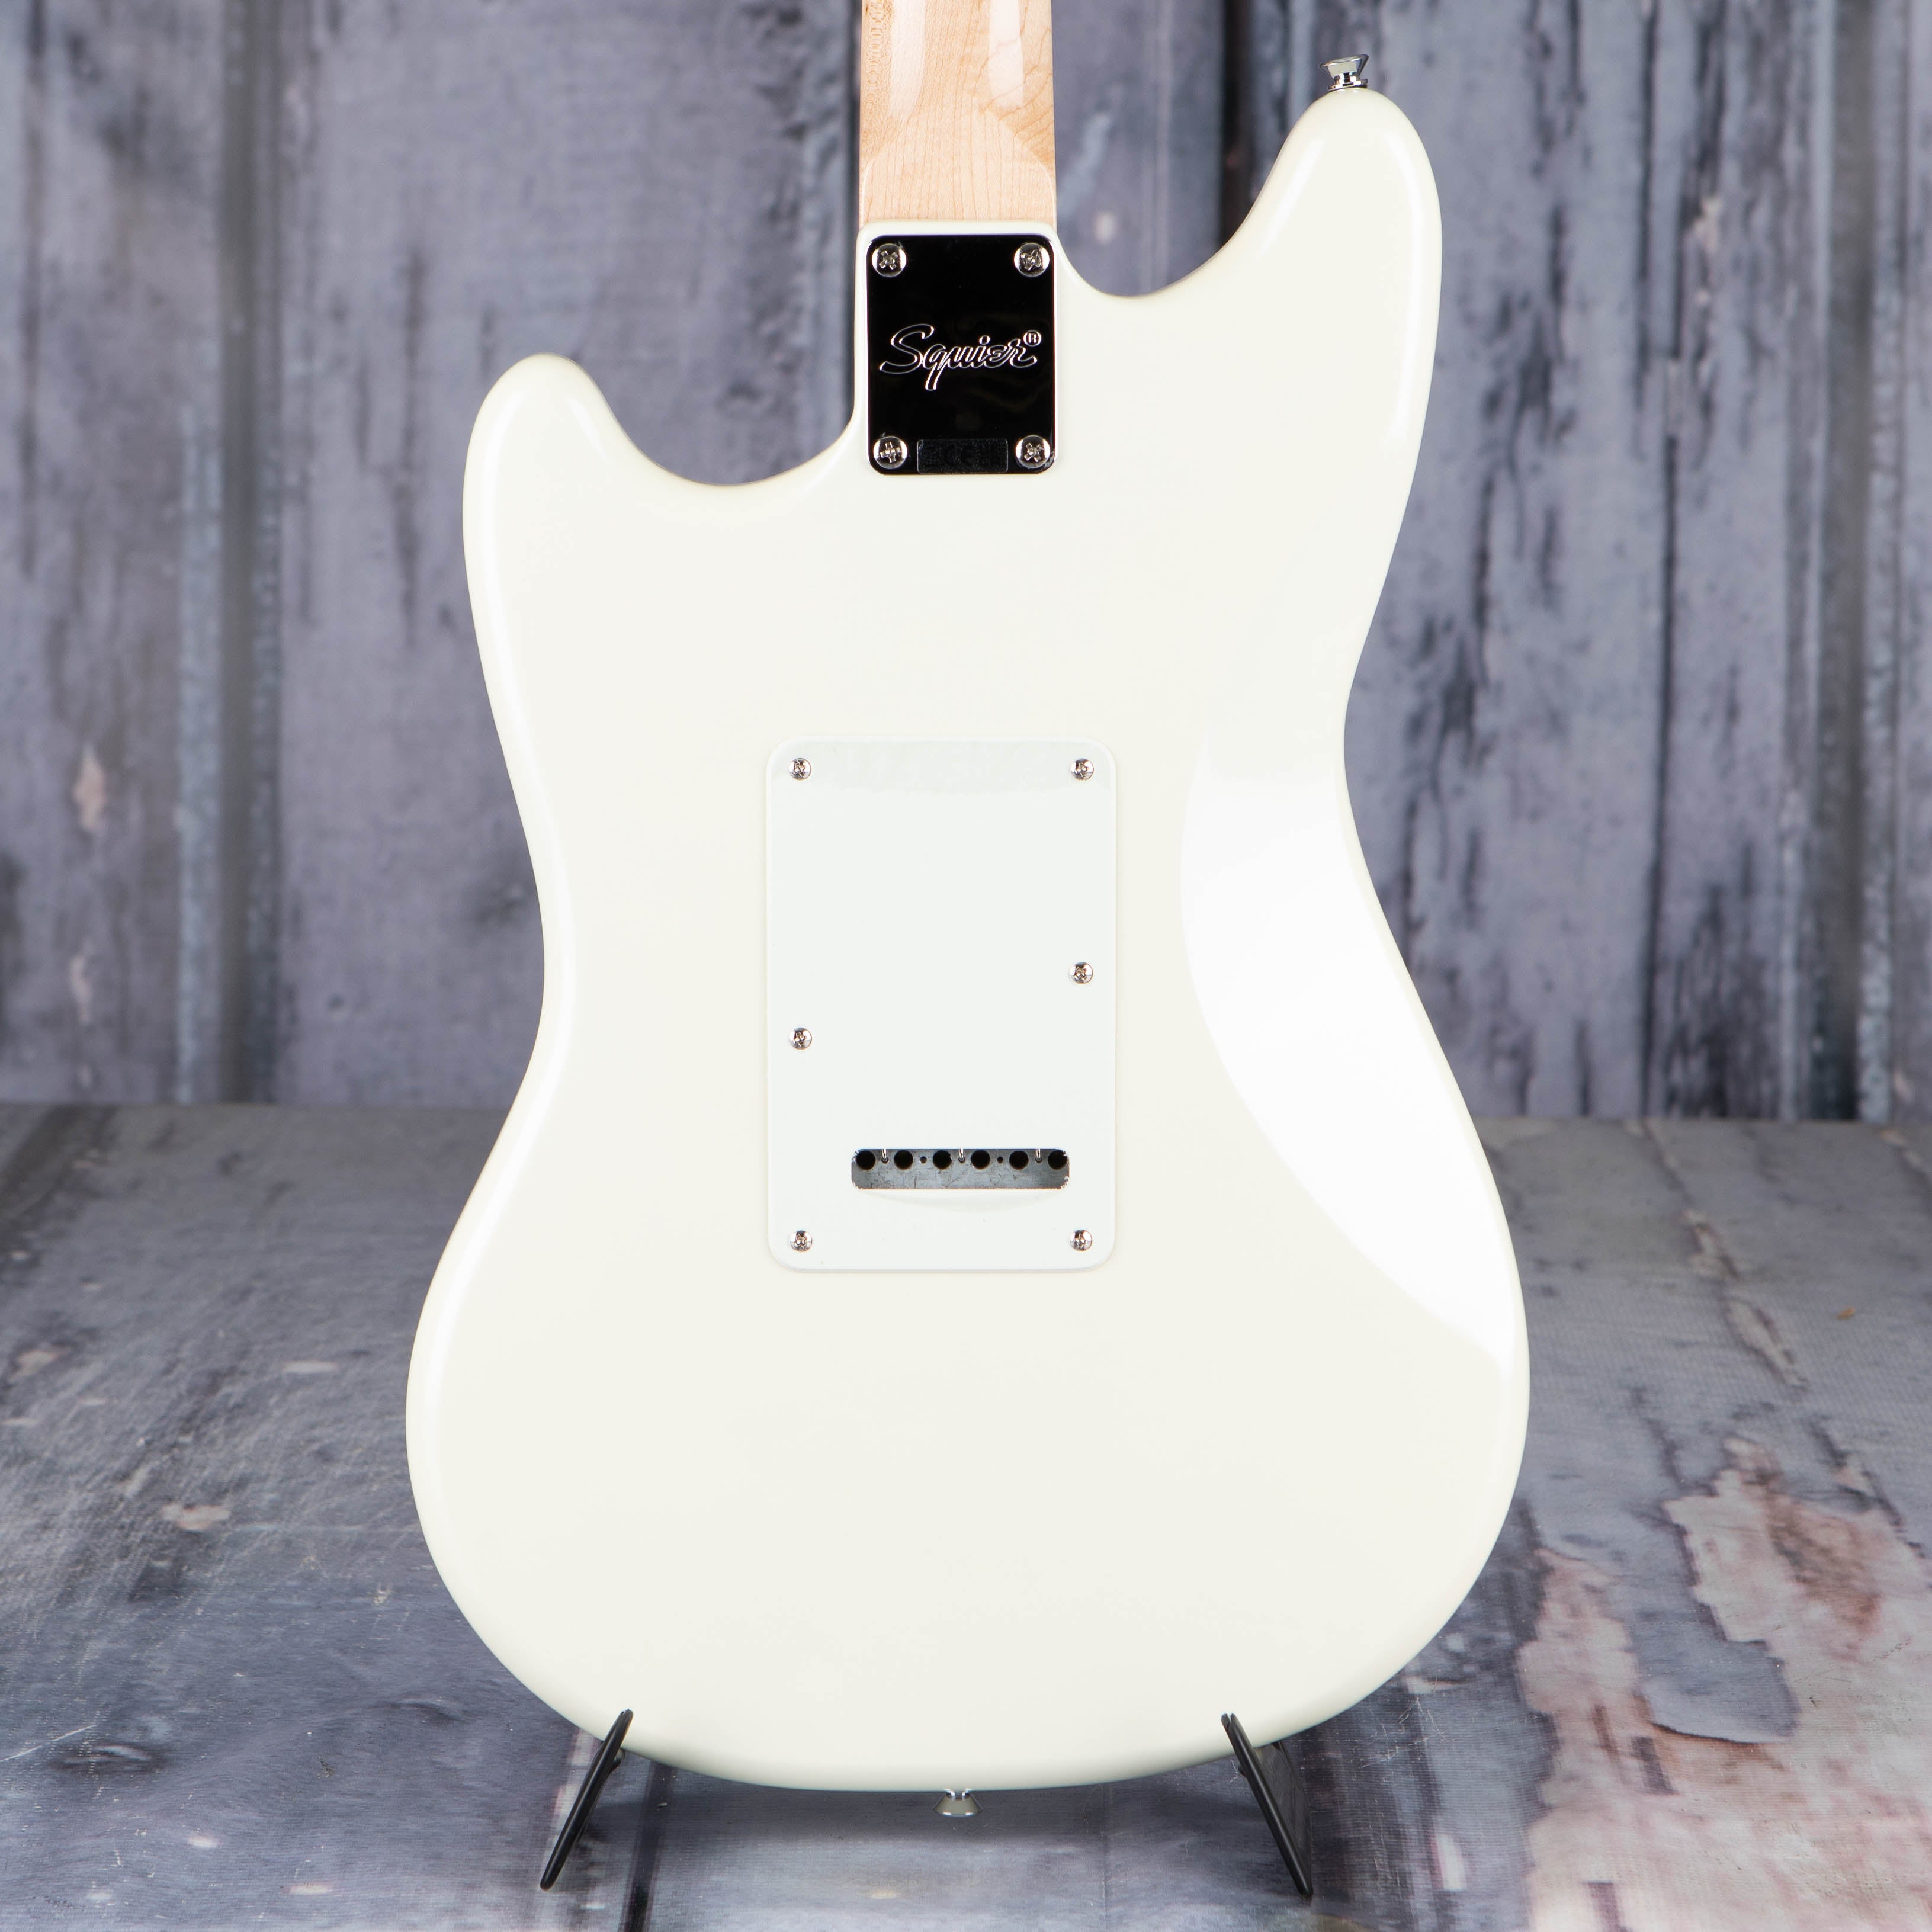 Squier Paranormal Cyclone Electric Guitar, Pearl White, back closeup